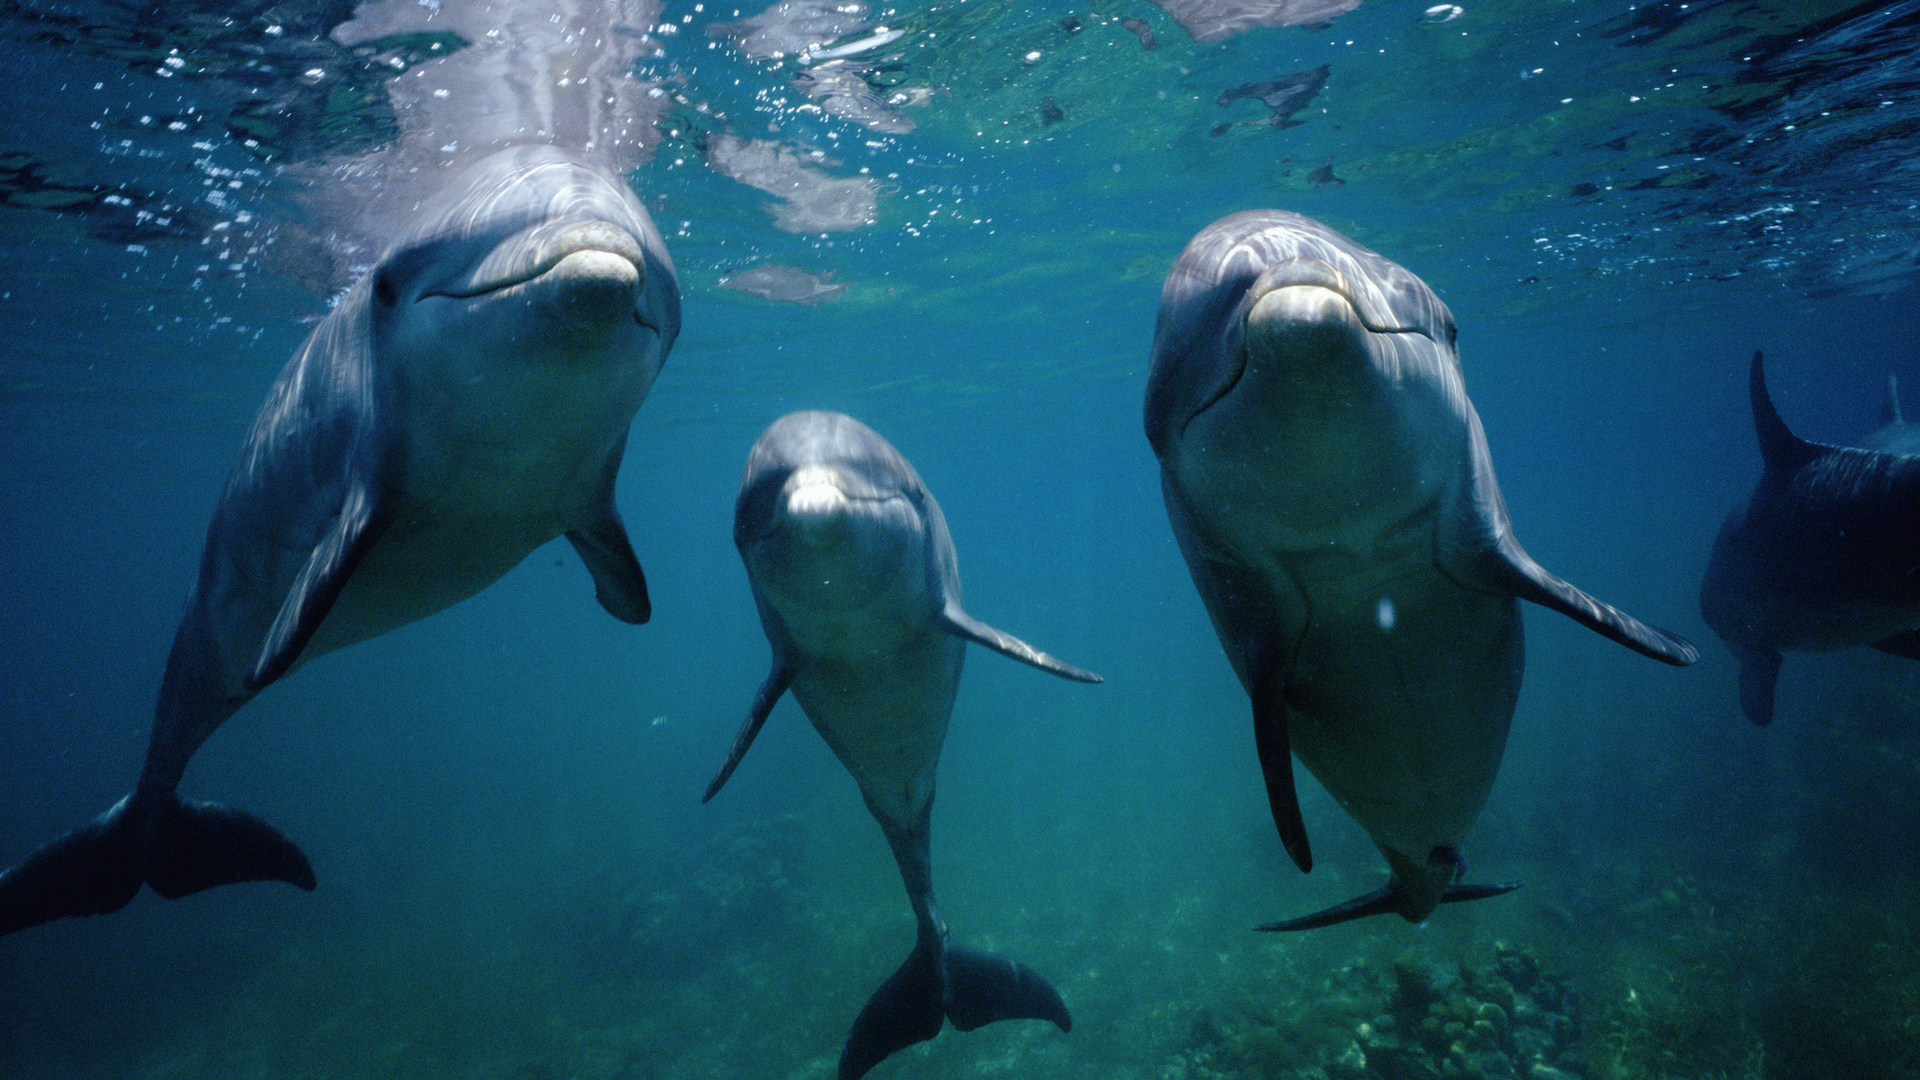 A photograph of three dolphins in the ocean looking at the camera.